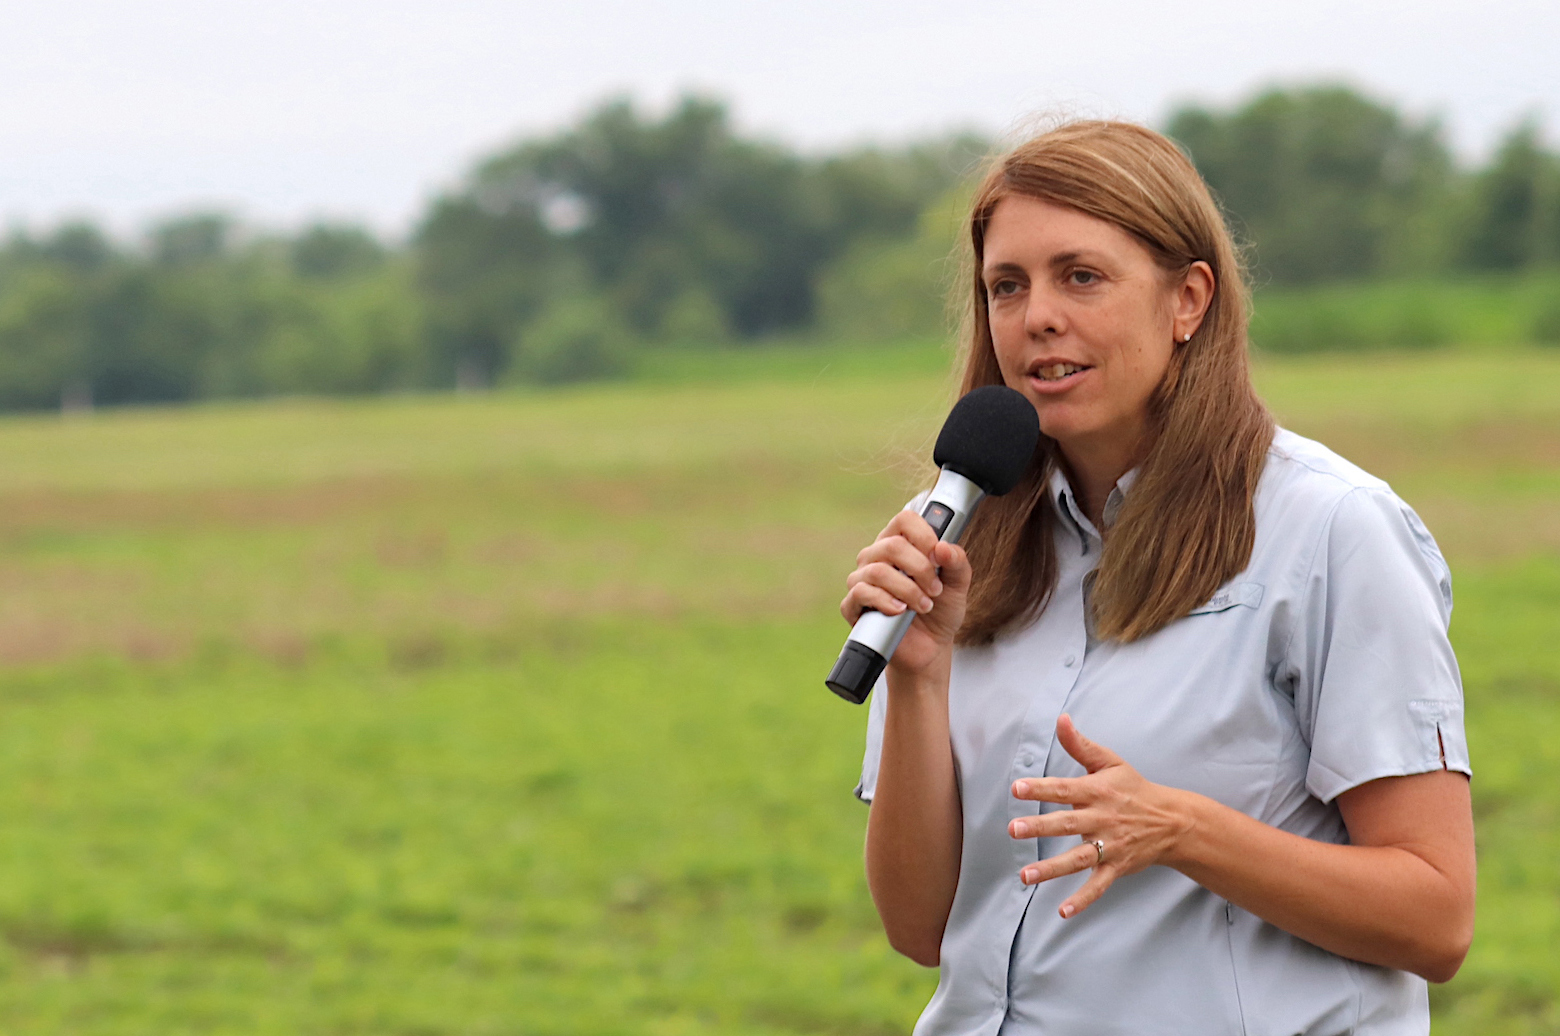 Open During a recent field day, MU Extension weed specialist Mandy Bish explains how using cereal rye as a cover crop may reduce waterhemp without yield loss in soybean. Photo by Linda Geist.